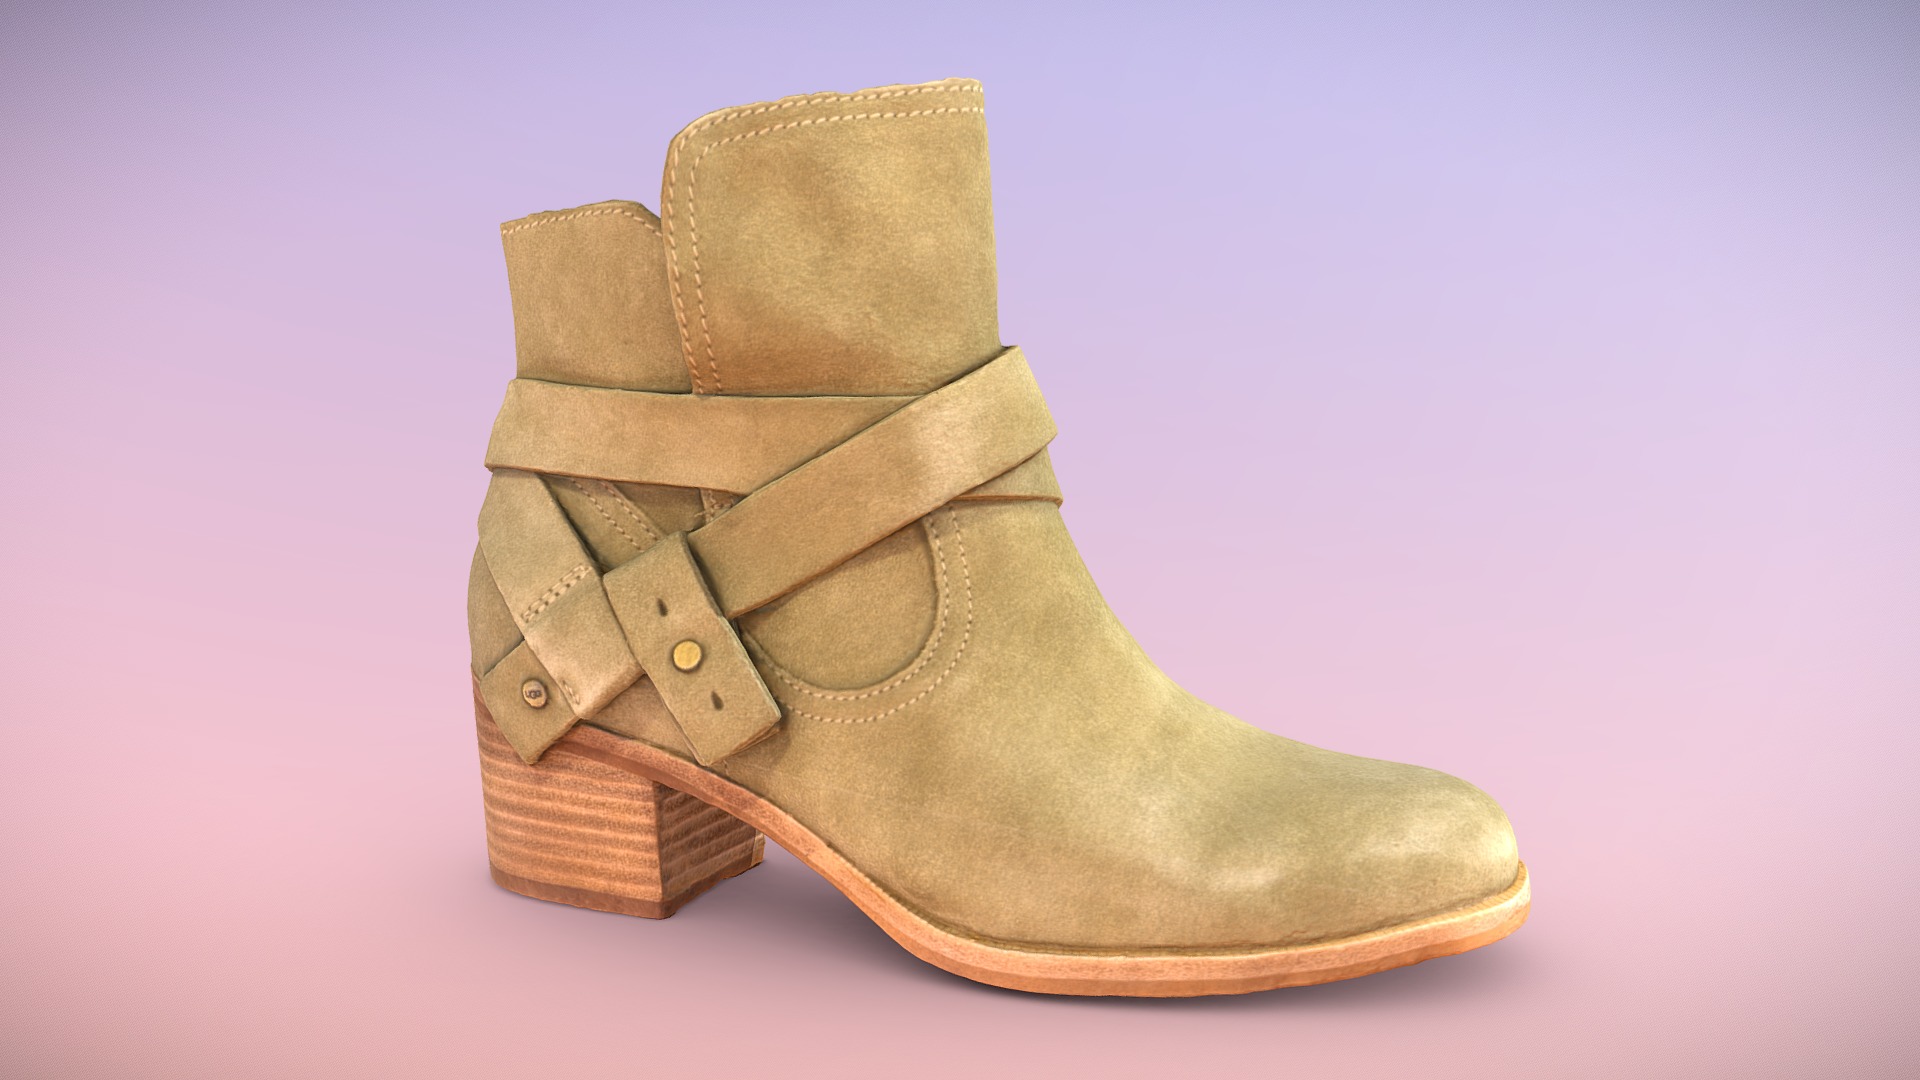 3D model UGG Elora Boot (includes low poly model) - This is a 3D model of the UGG Elora Boot (includes low poly model). The 3D model is about a brown and tan shoe.